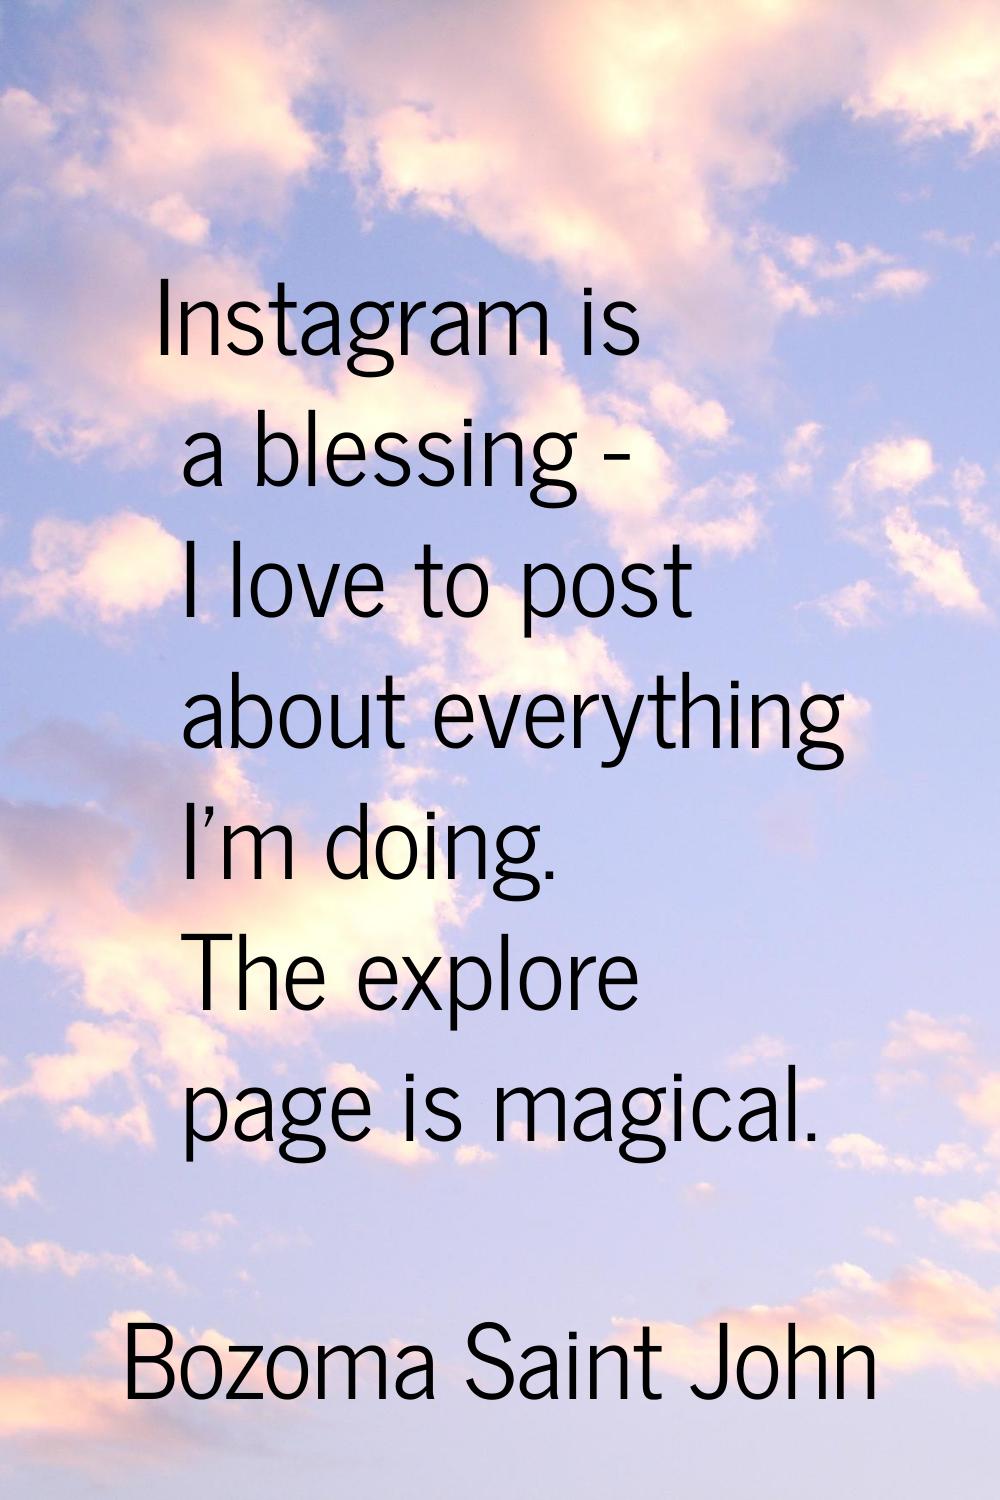 Instagram is a blessing - I love to post about everything I'm doing. The explore page is magical.